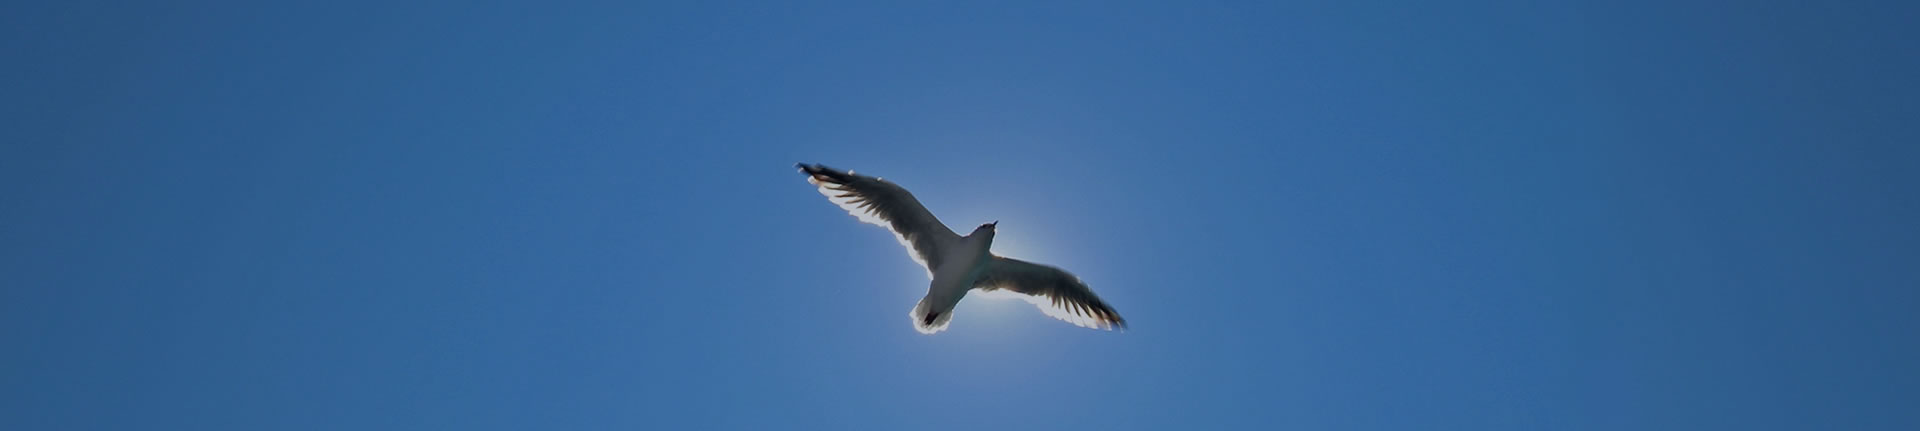 A seagull flying in a cloudless blue sky.